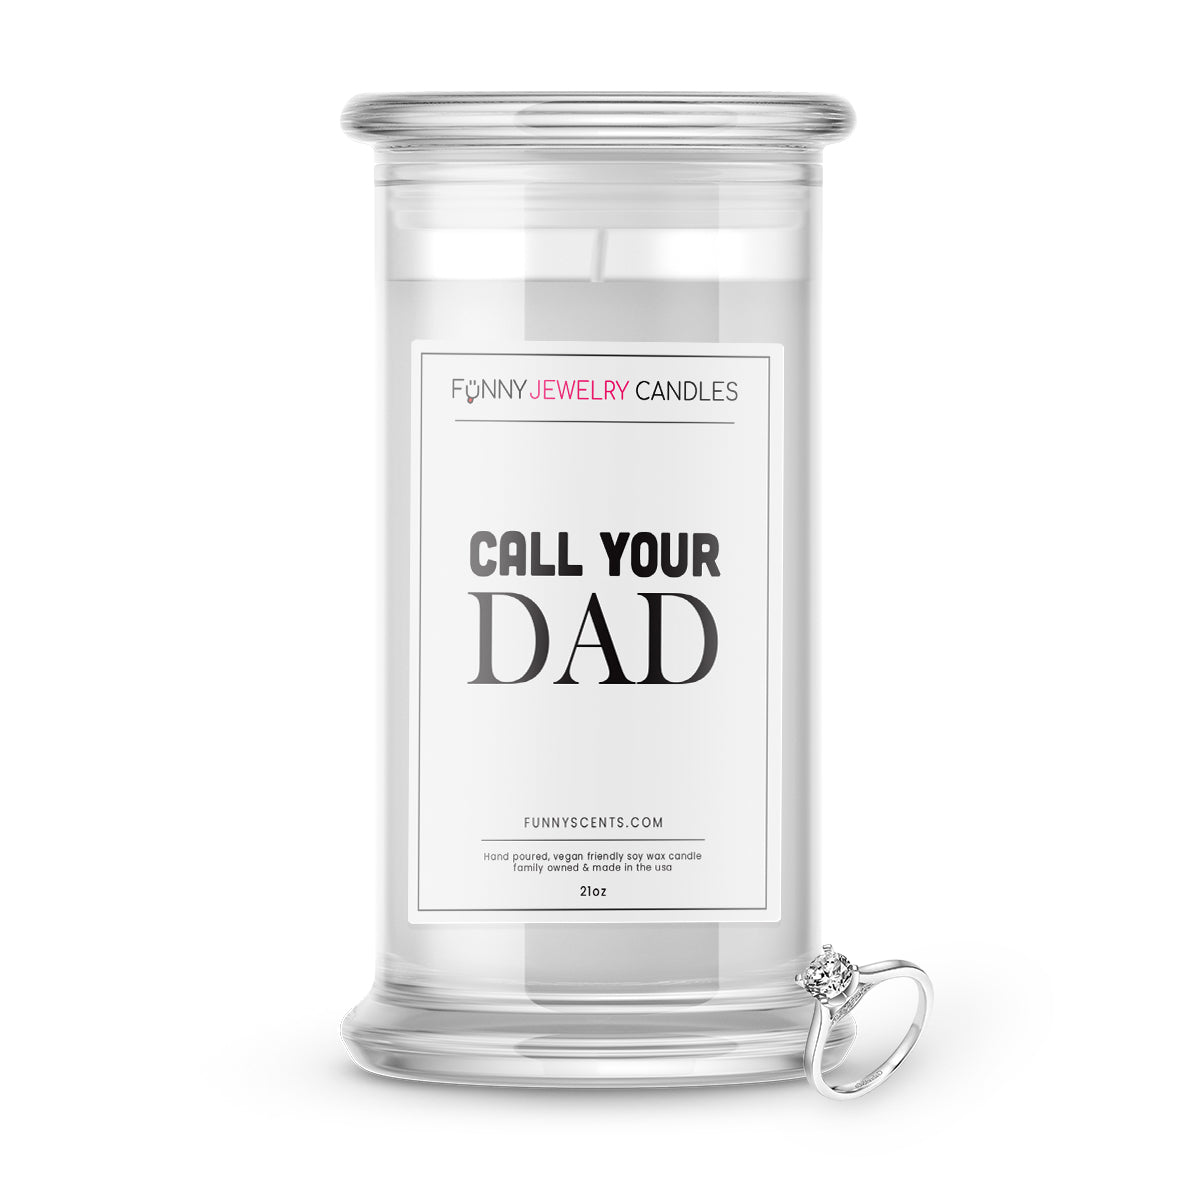 Call Your Dad Jewelry Funny Candles